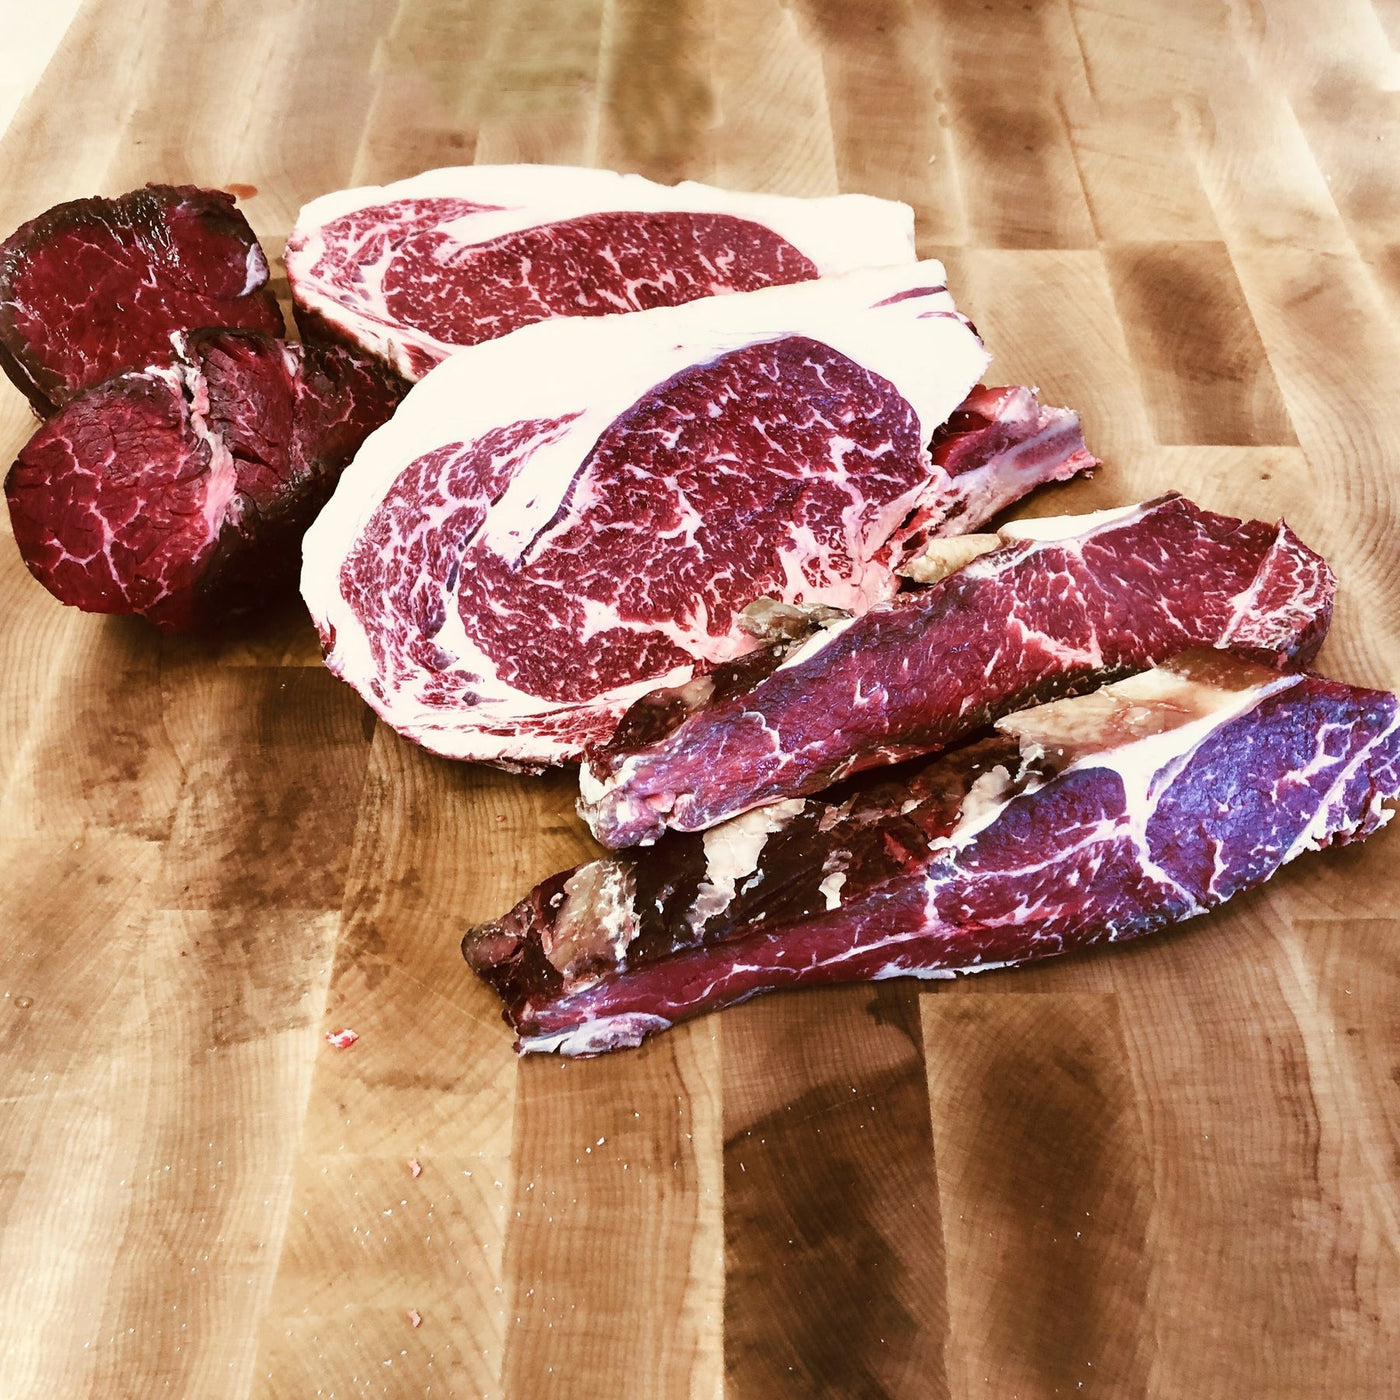 Galician Beef Trio Pack - Beef - Thomas Joseph Butchery - Ethical Dry-Aged Meat The Best Steak UK Thomas Joseph Butchery